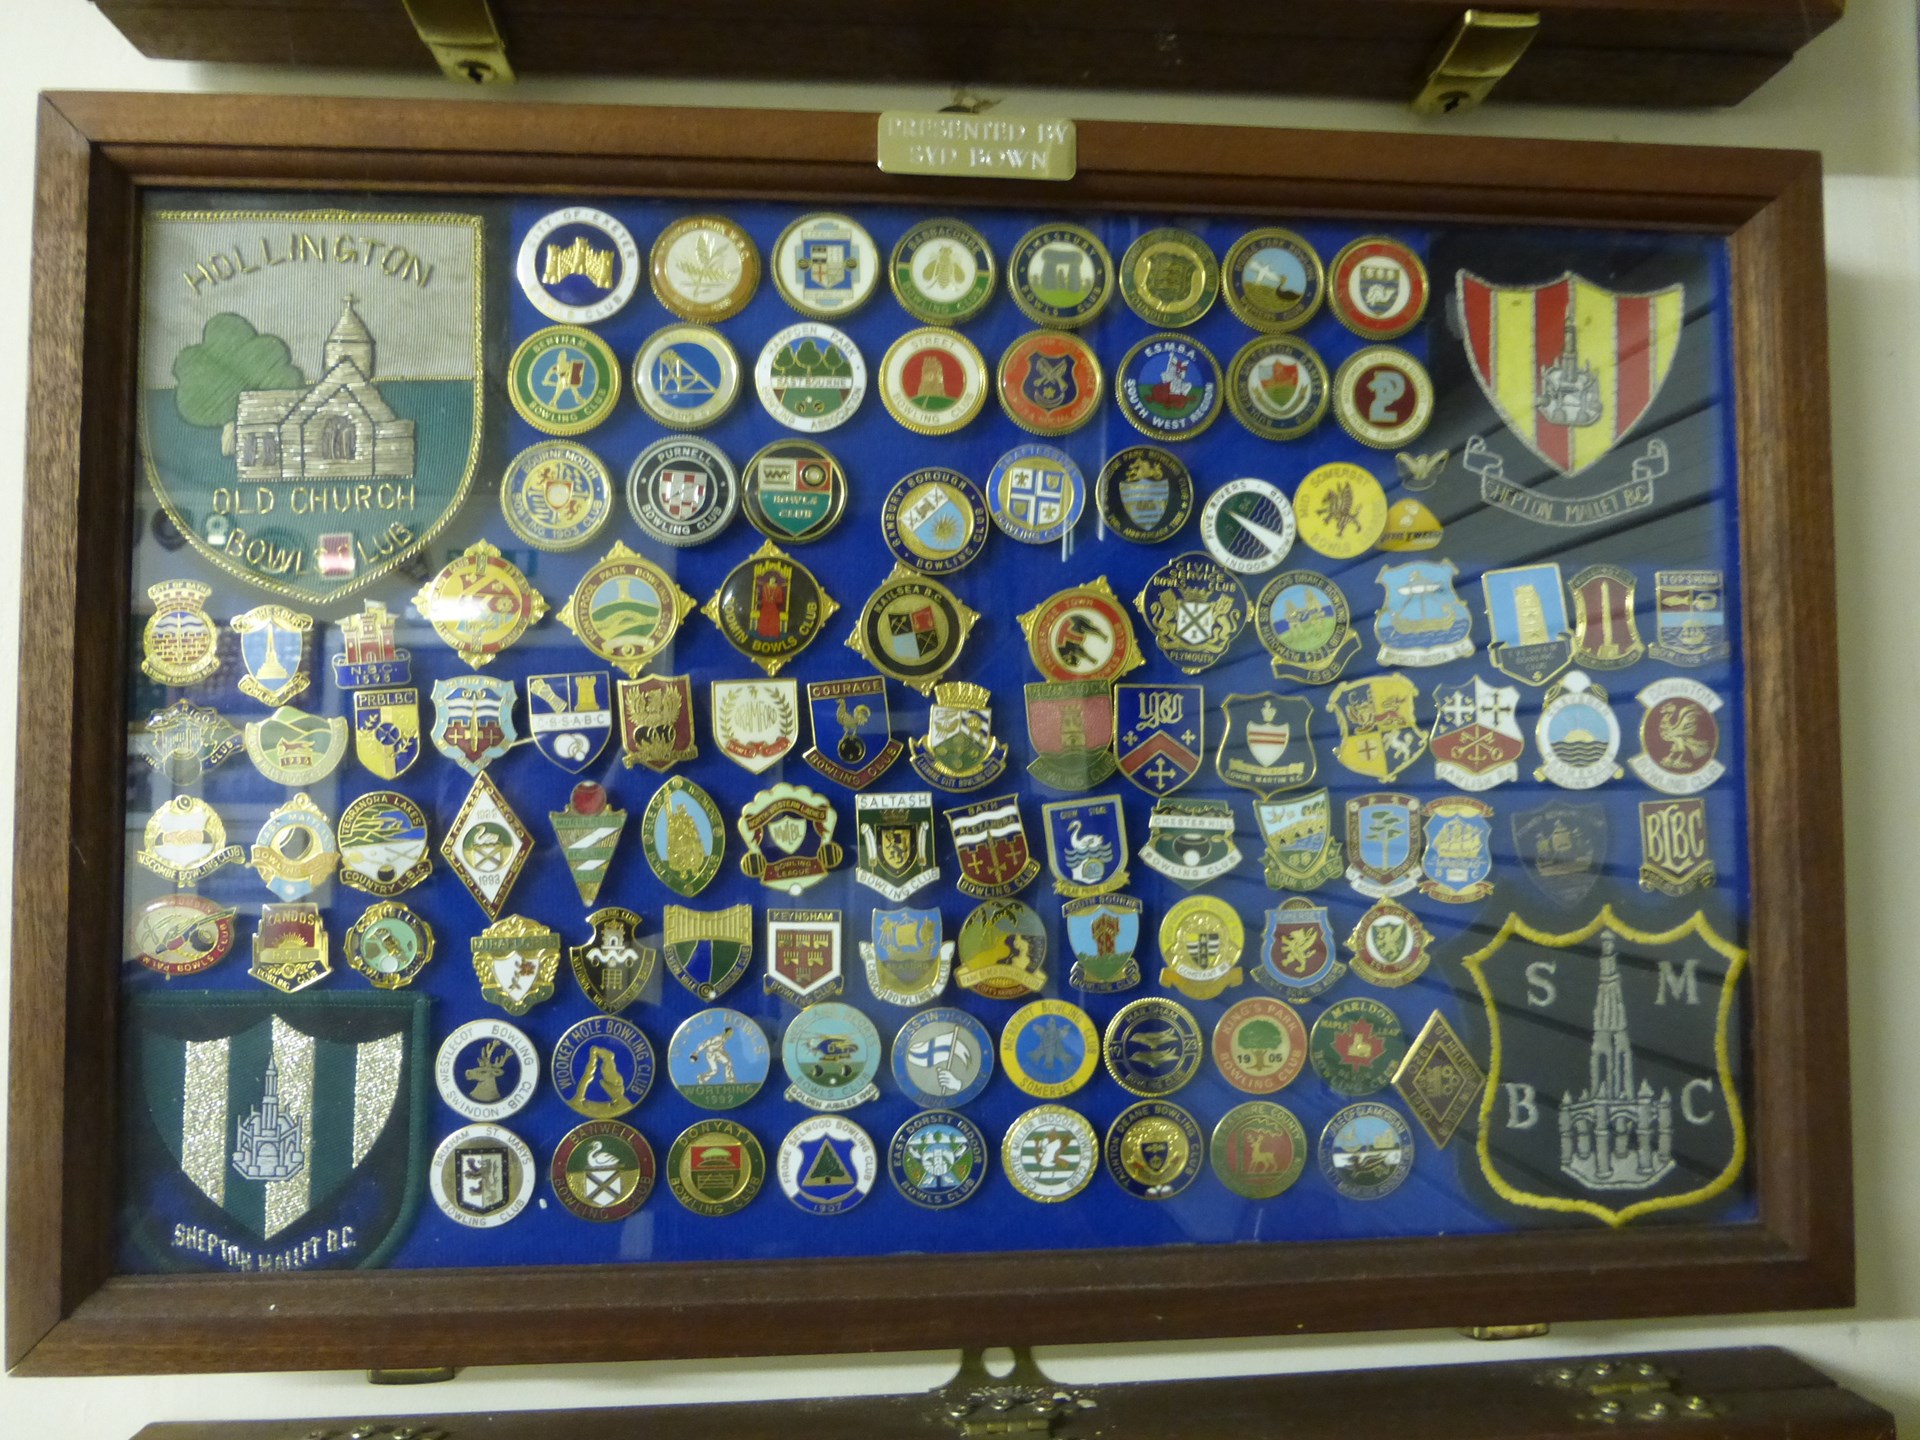 Badges of Syd Brown 2/3. He was Club Member of the year in 1990.